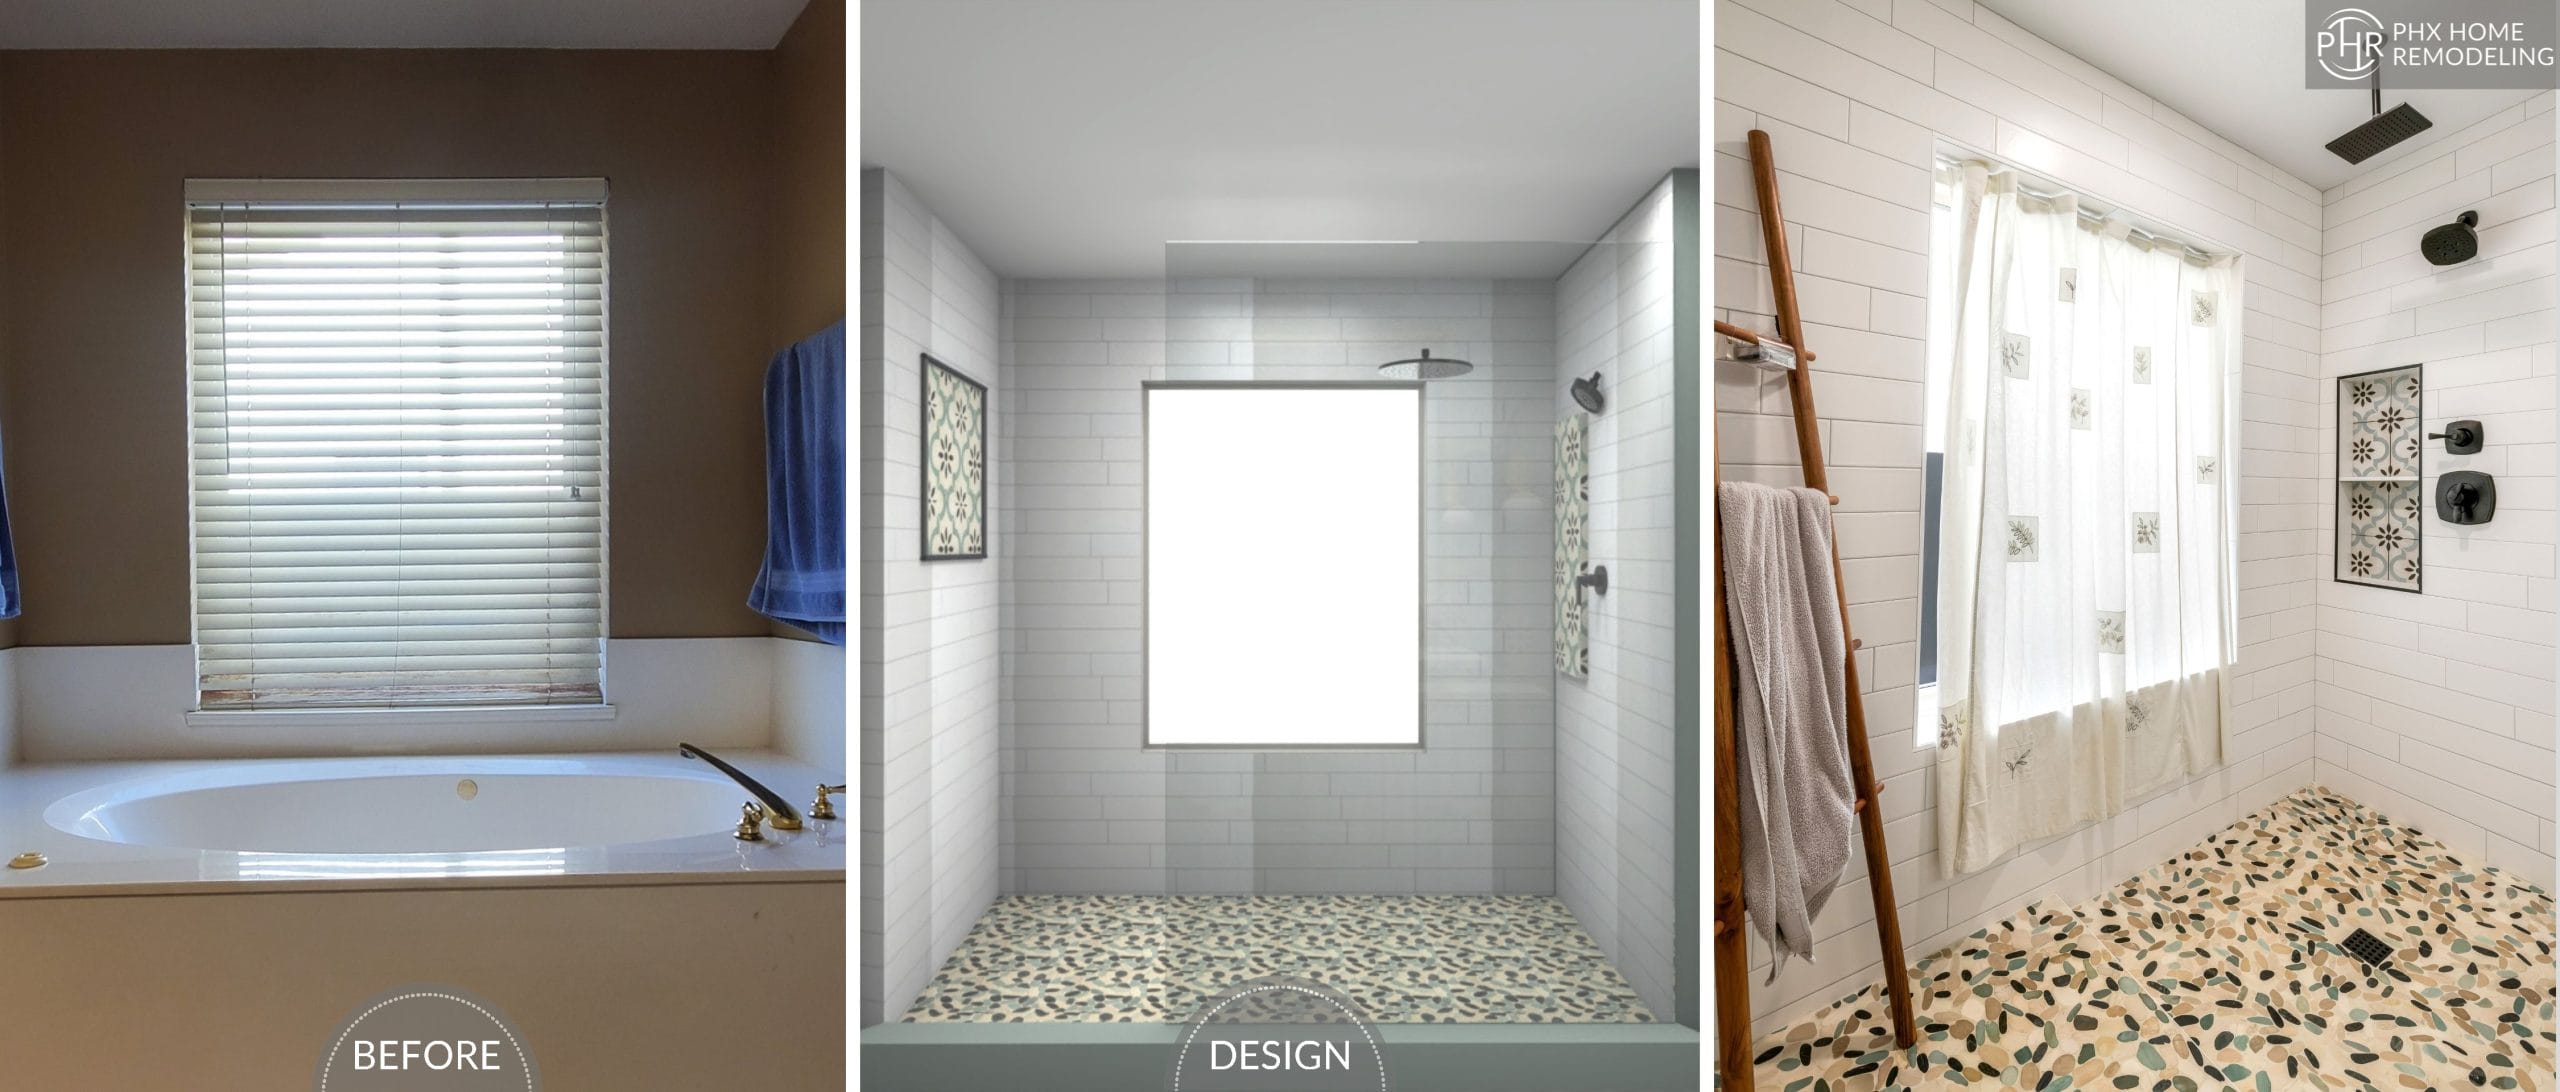 RENDER master bathroom shower reno before and after in tempe AZ